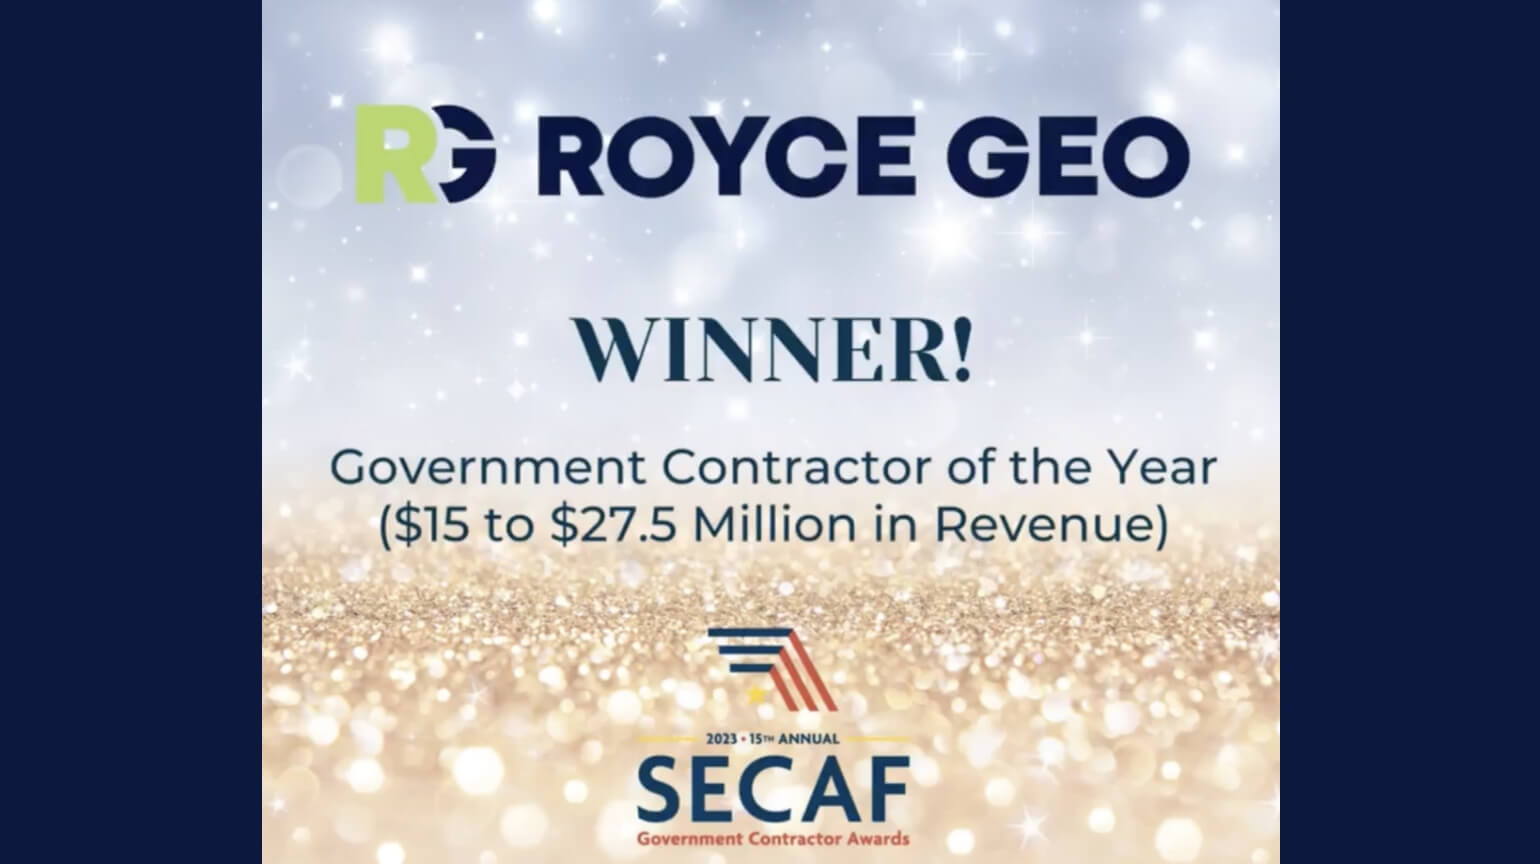 SECAF Award Banner for Government Contractor of the Year